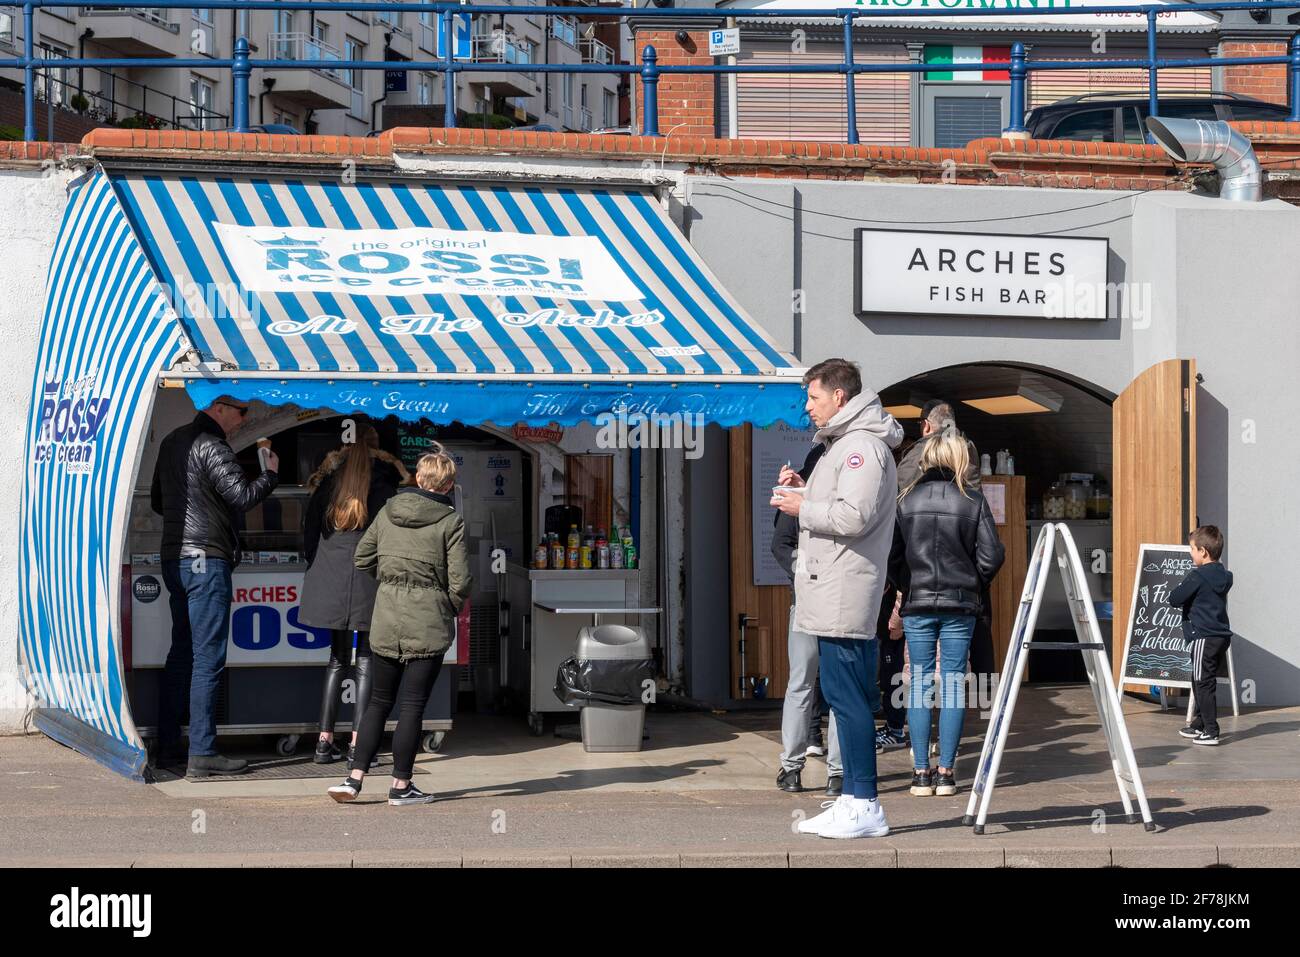 People at Rossi ice cream stall and Arches fish bar of The Arches in Southend on Sea, Essex, UK. Customers for takeaway bars during COVID 19 lockdown Stock Photo